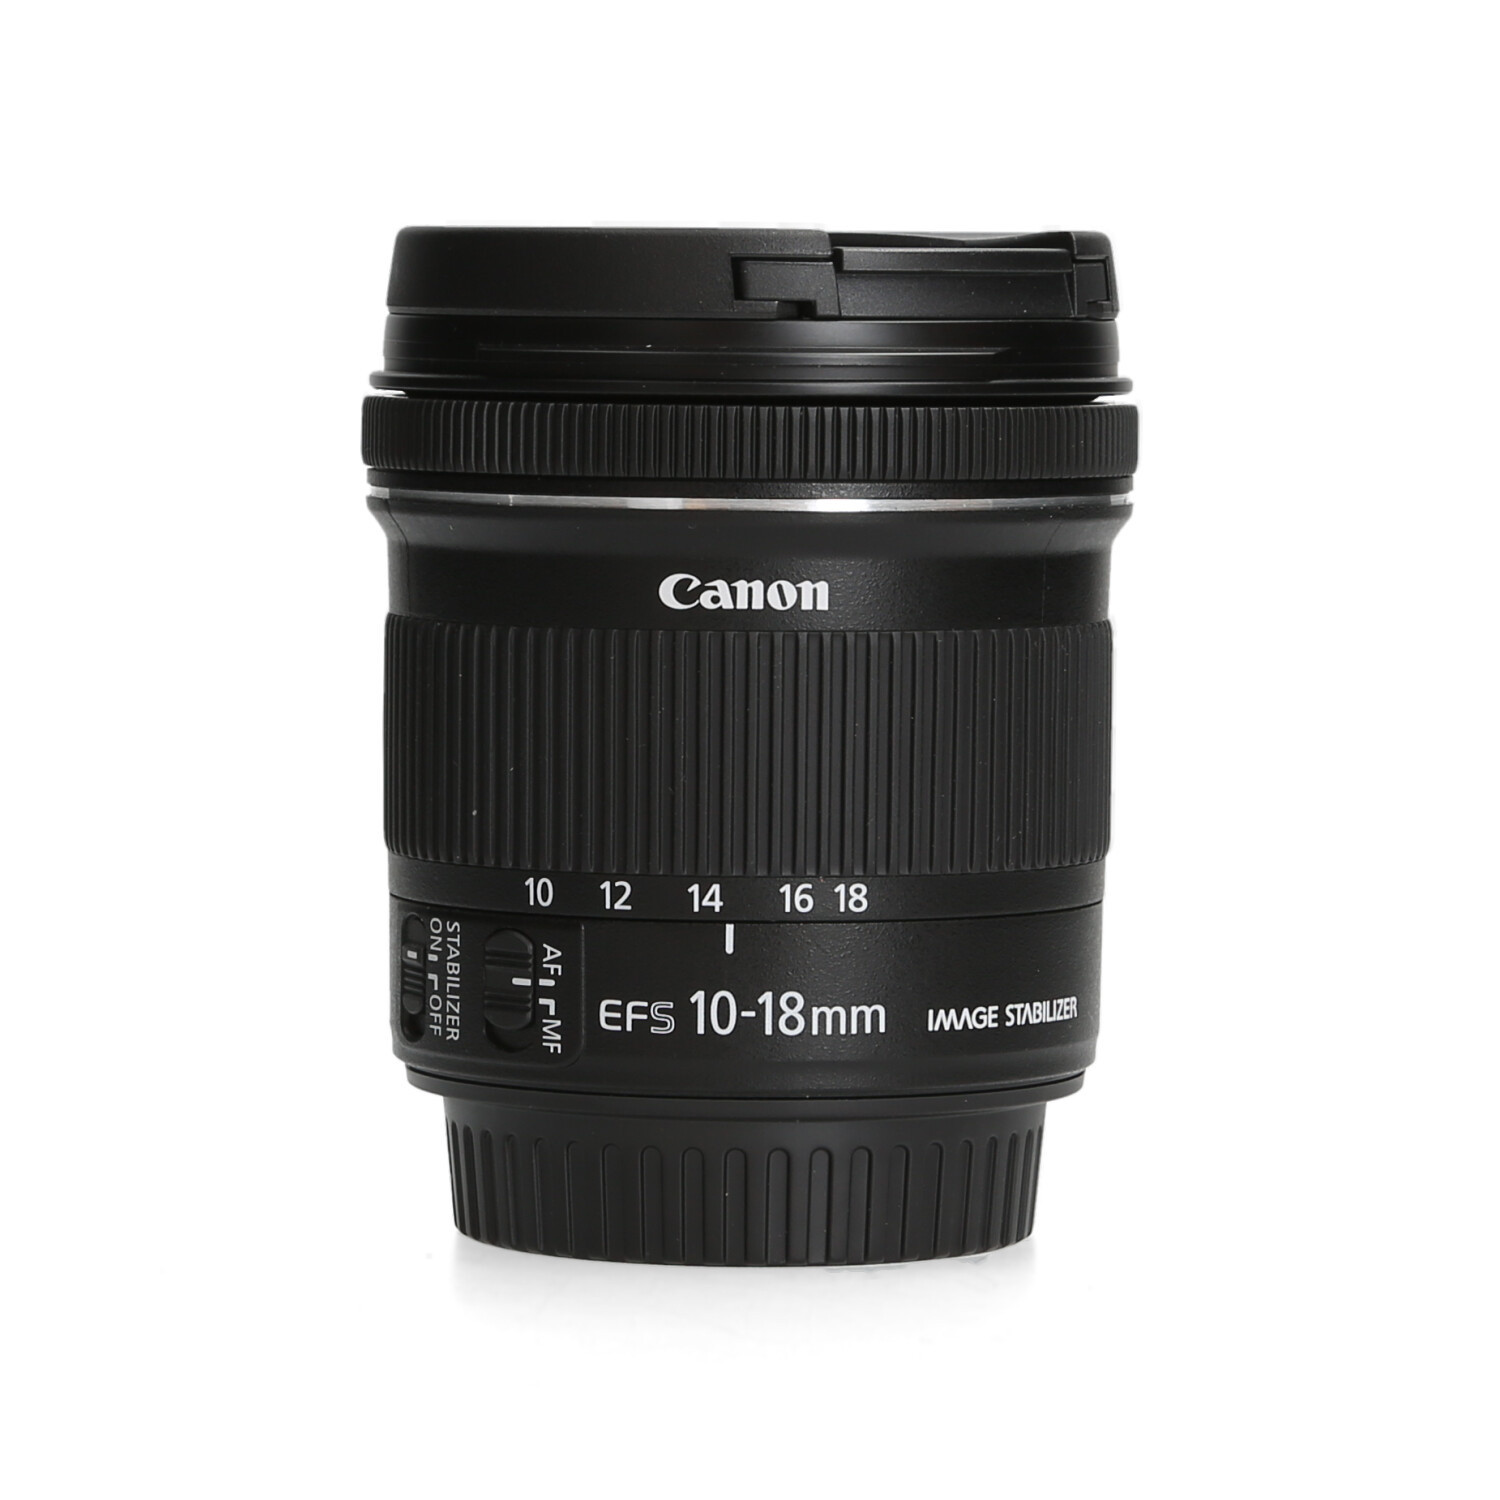 Canon Canon 10-18mm 4.5-5.6 EF IS STM - Nieuw - Incl. BTW